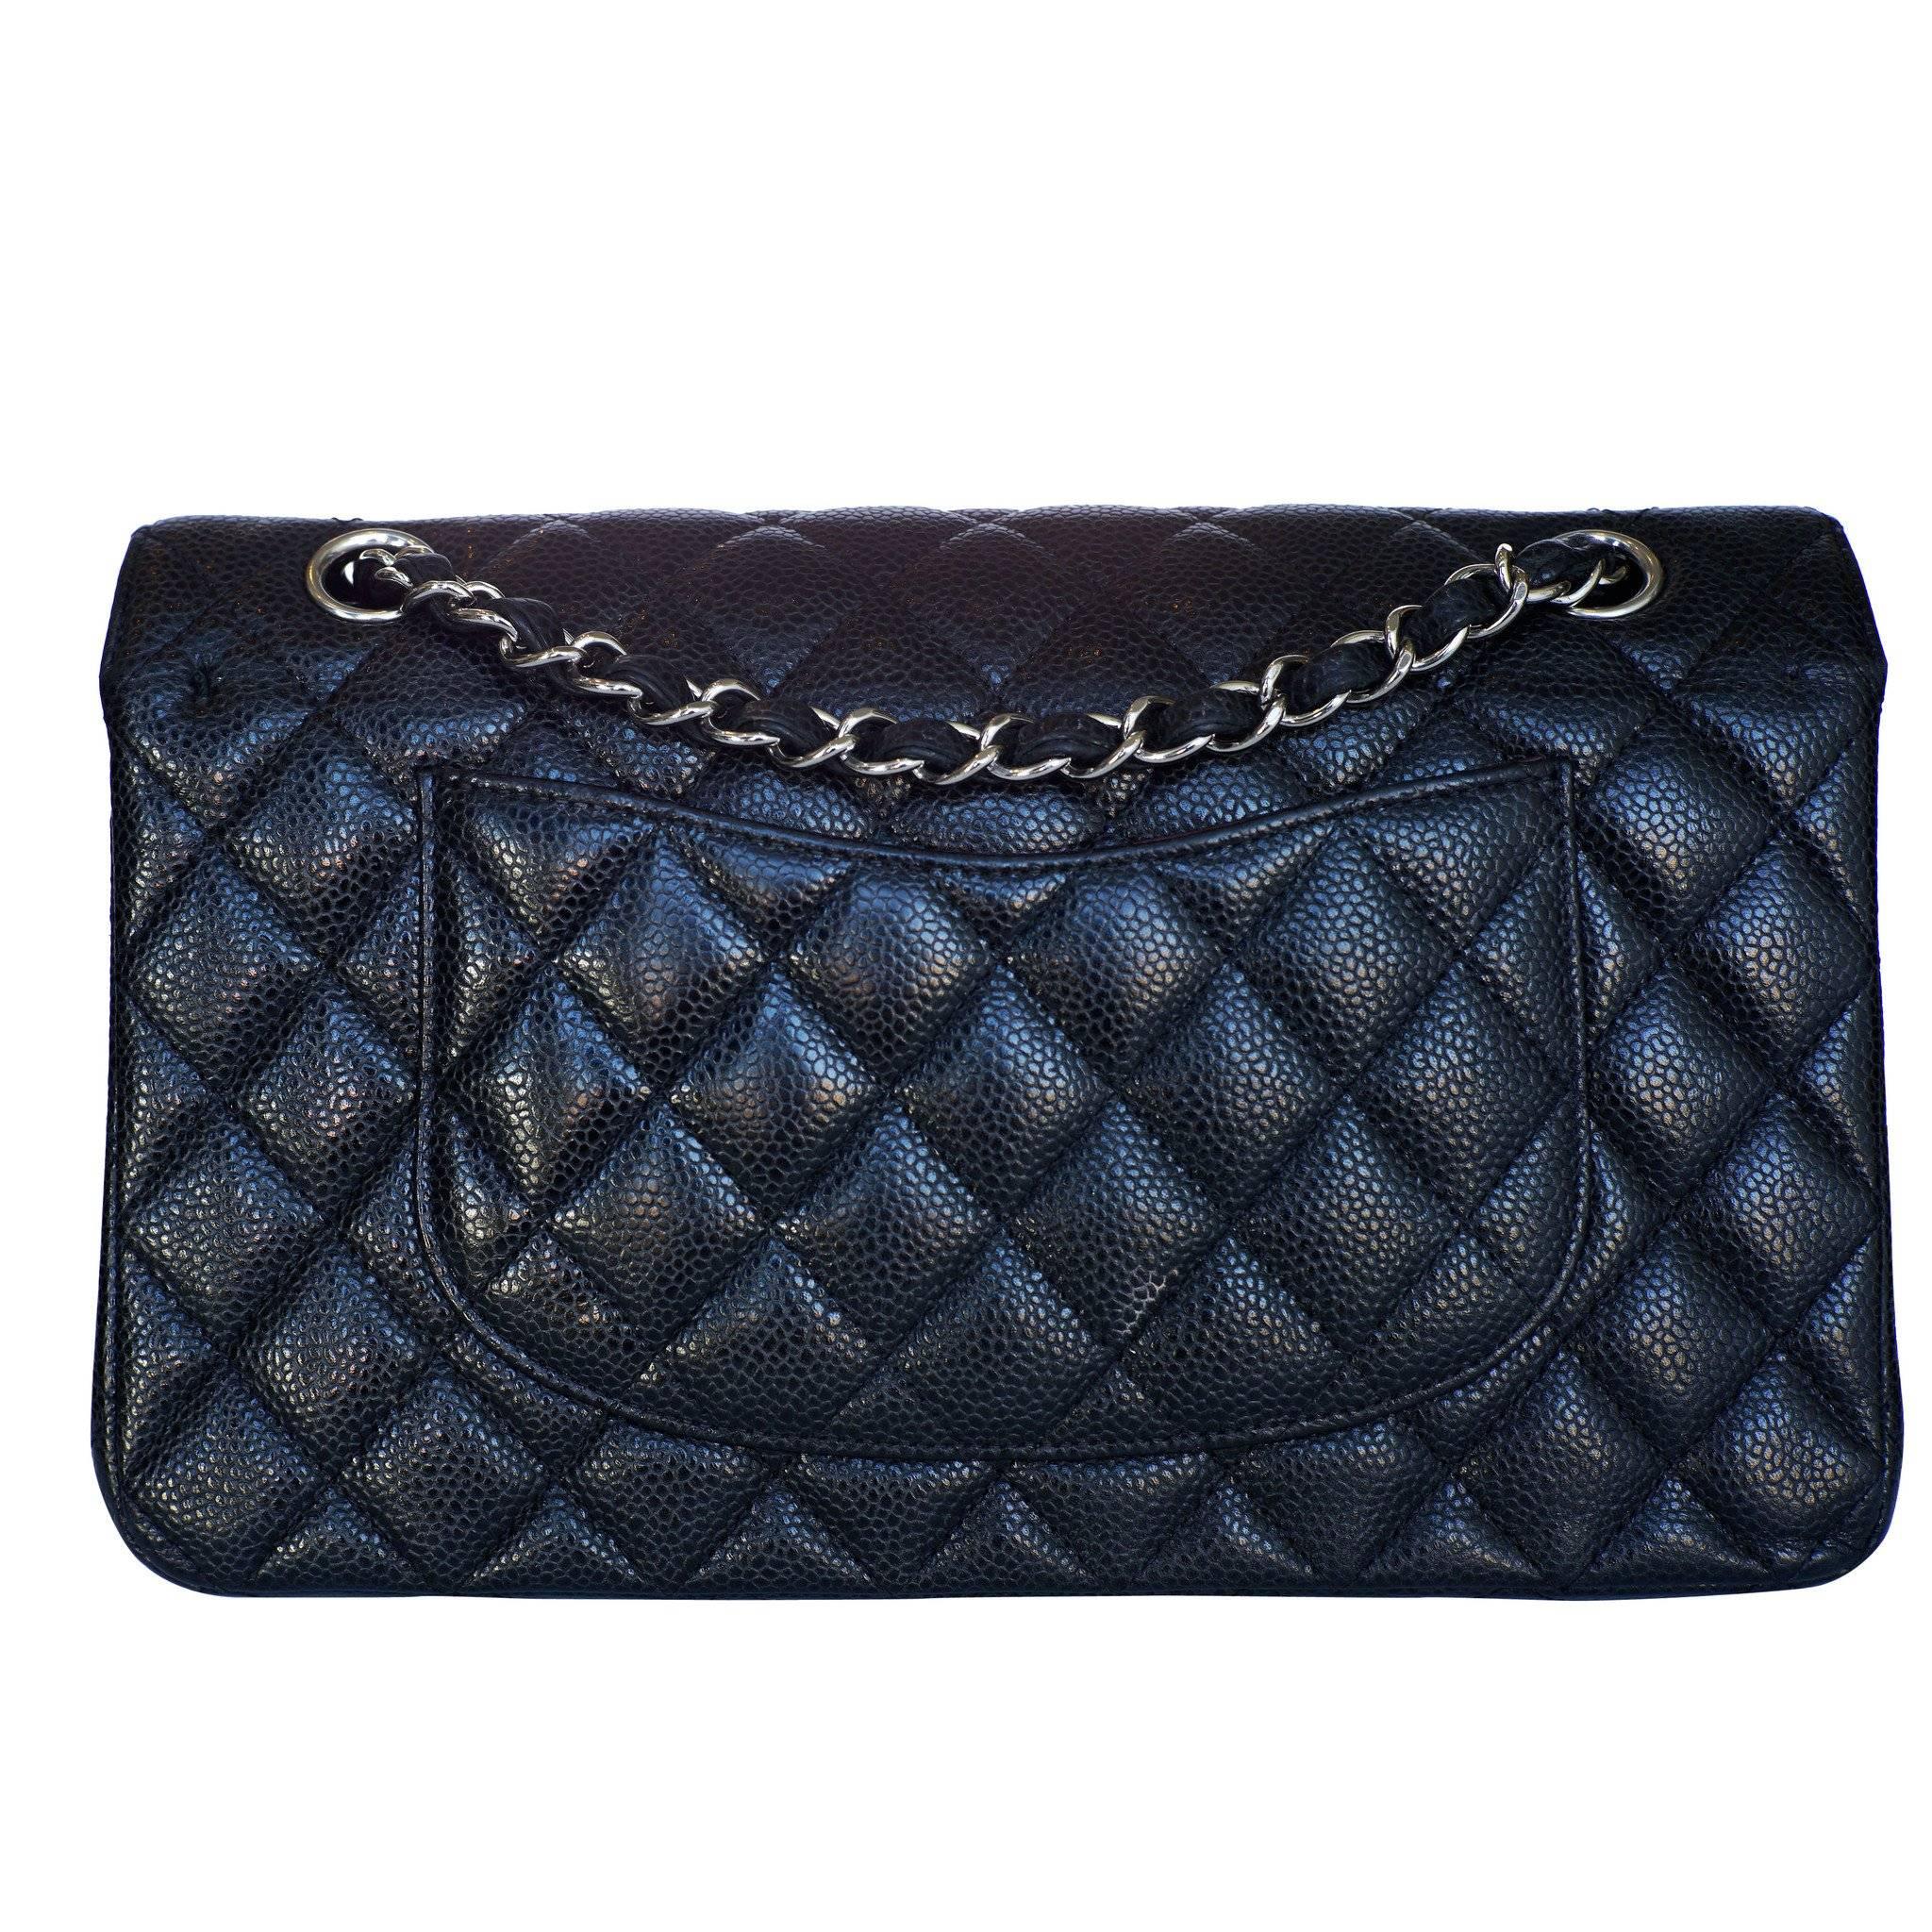 Women's or Men's Chanel Black Leather Double Flap Hand Bag